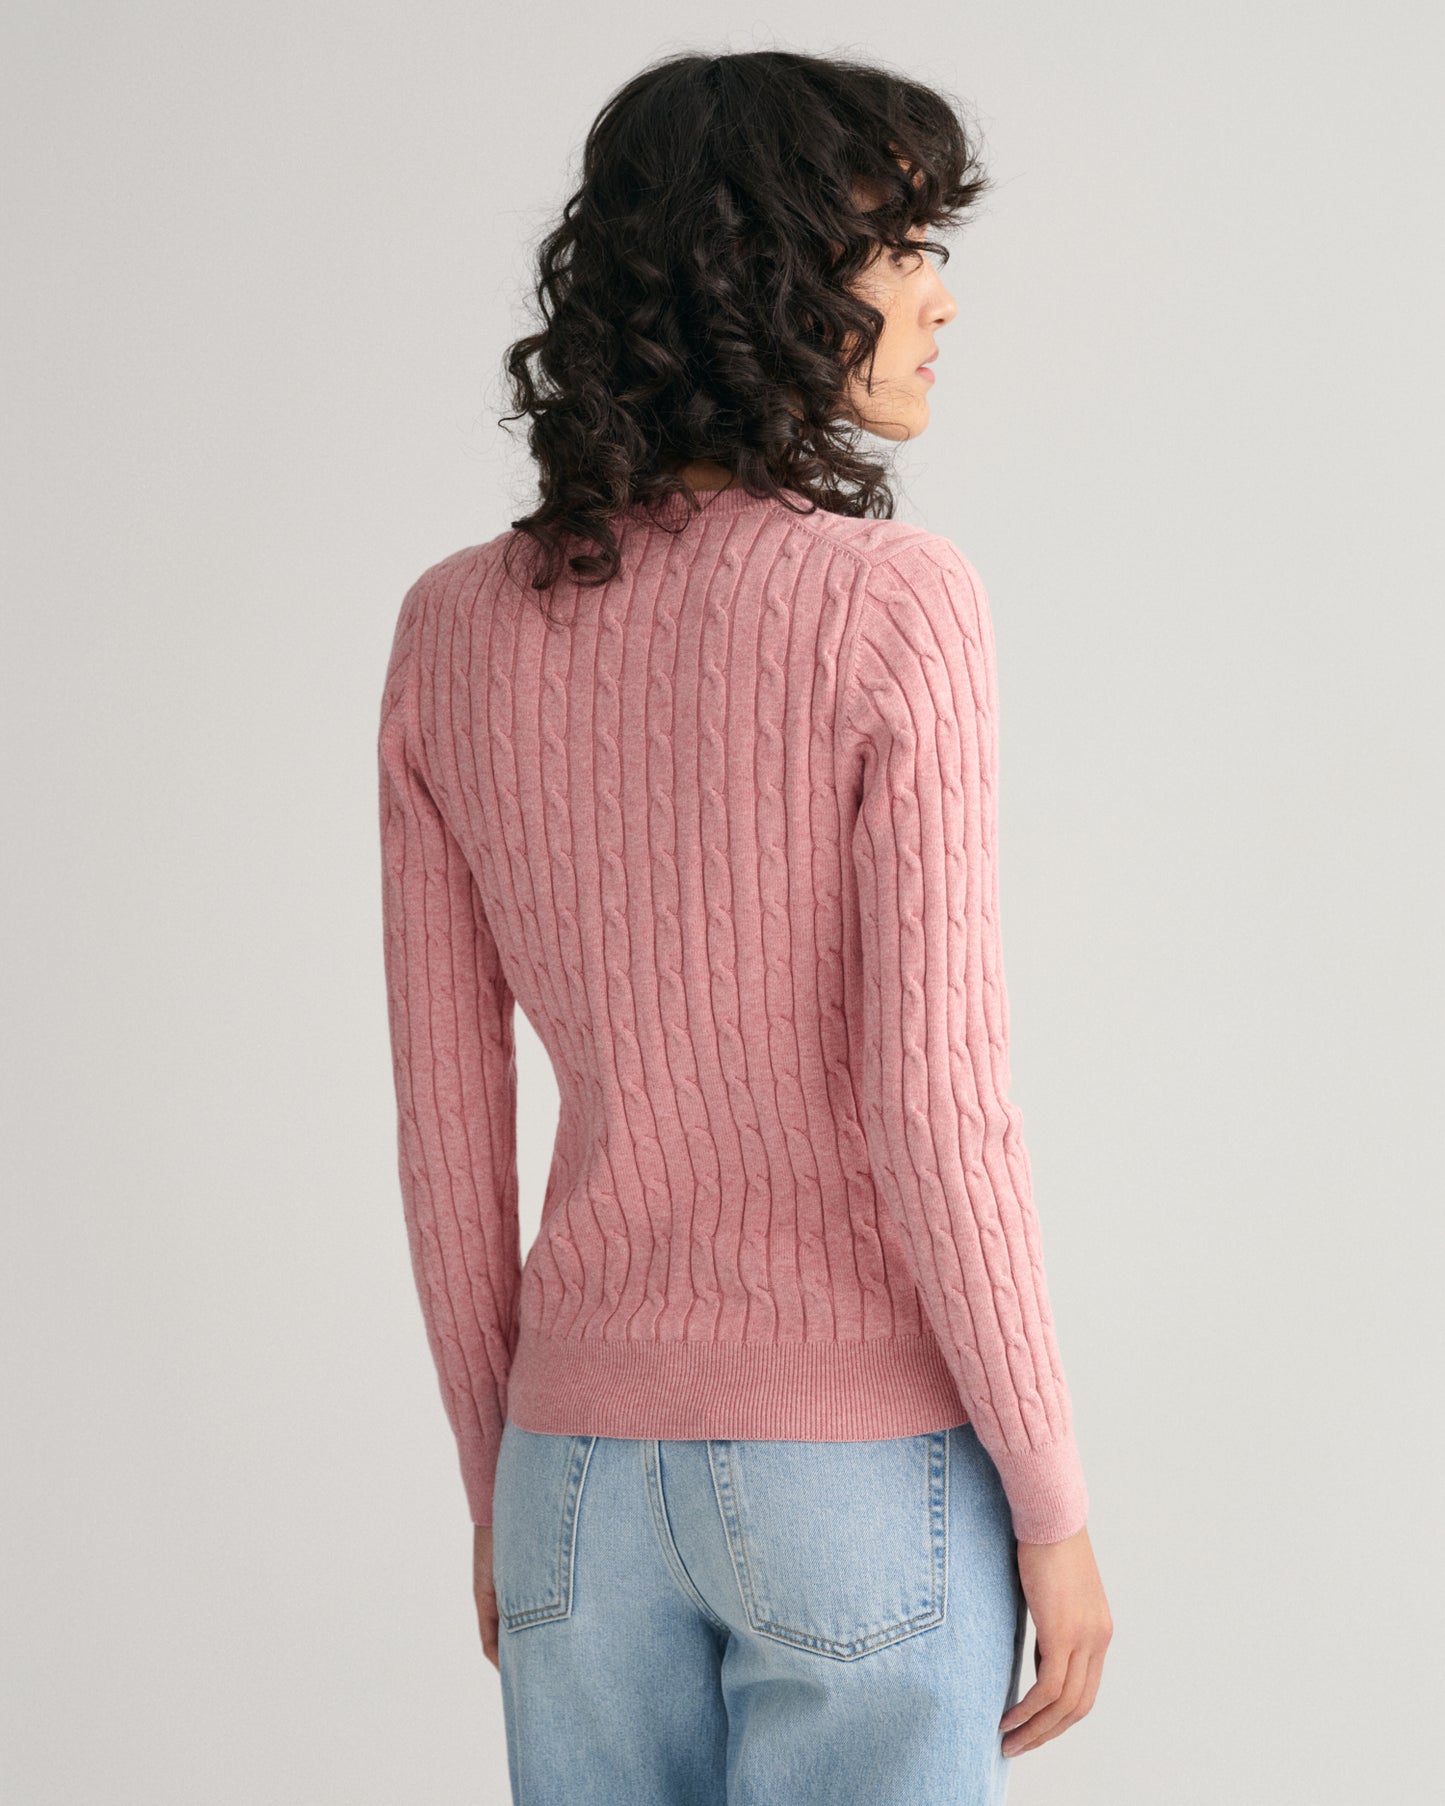 Stretch Cotton Cable Knit Crew Neck Sweater - Autumn Sunset